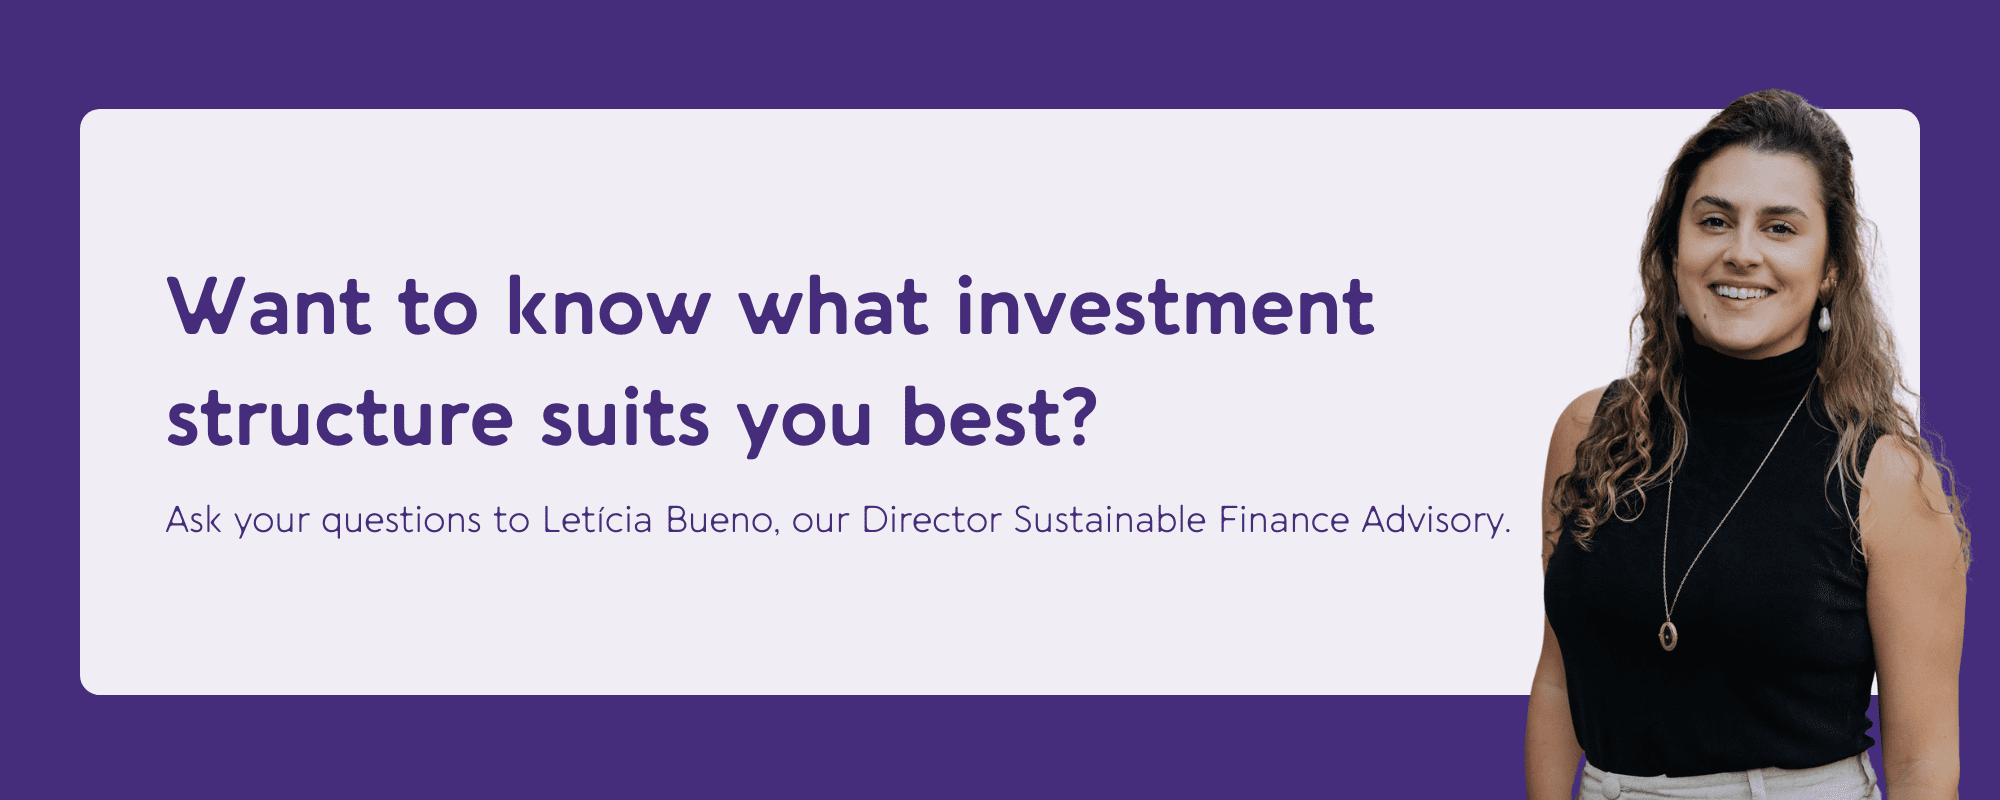 Want to know what investment structure suits you best?